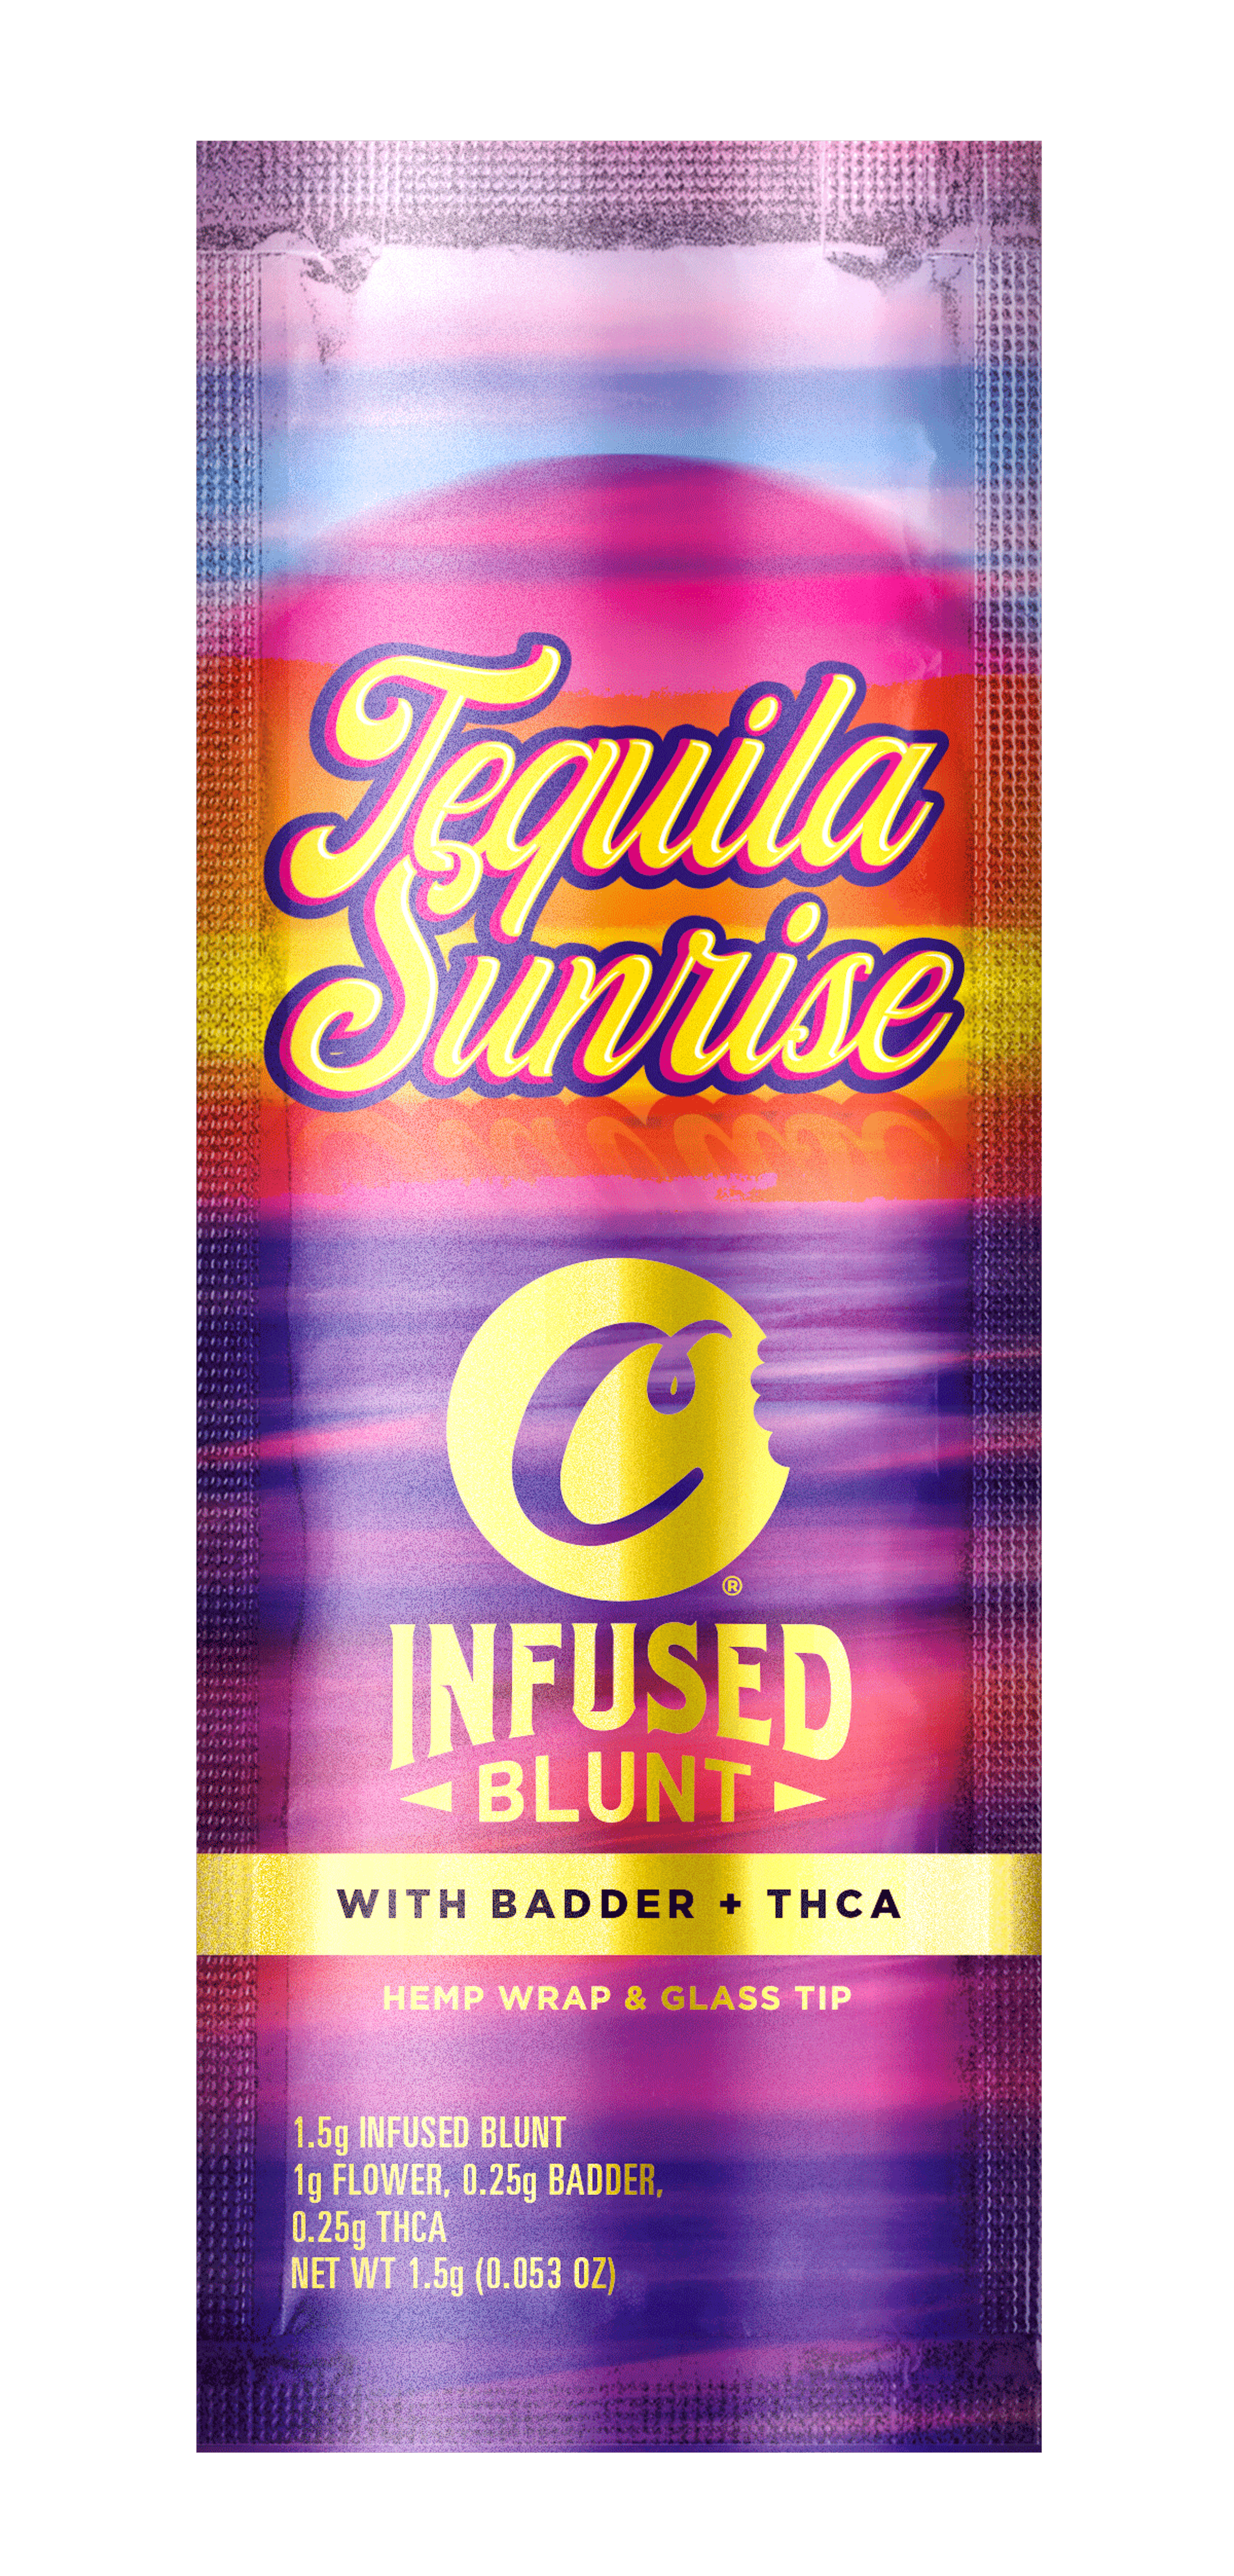 Cookies - Tequila Sunrise - THC - Infused - Blunt - Preroll - Tube - Pouch - 1.5g - CA